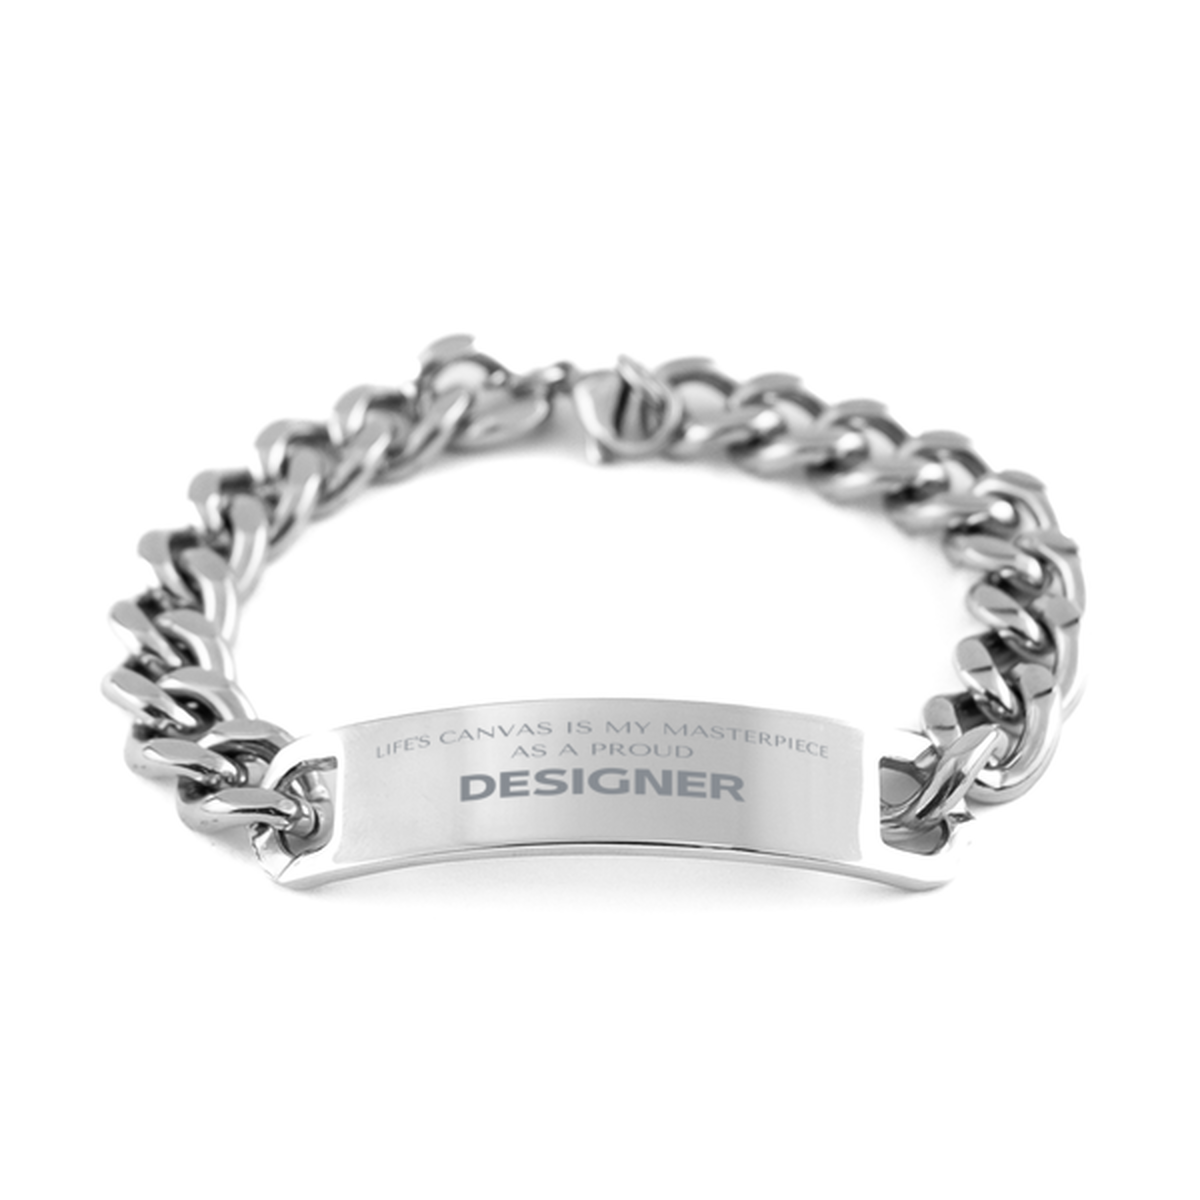 Proud Designer Gifts, Life's canvas is my masterpiece, Epic Birthday Christmas Unique Cuban Chain Stainless Steel Bracelet For Designer, Coworkers, Men, Women, Friends